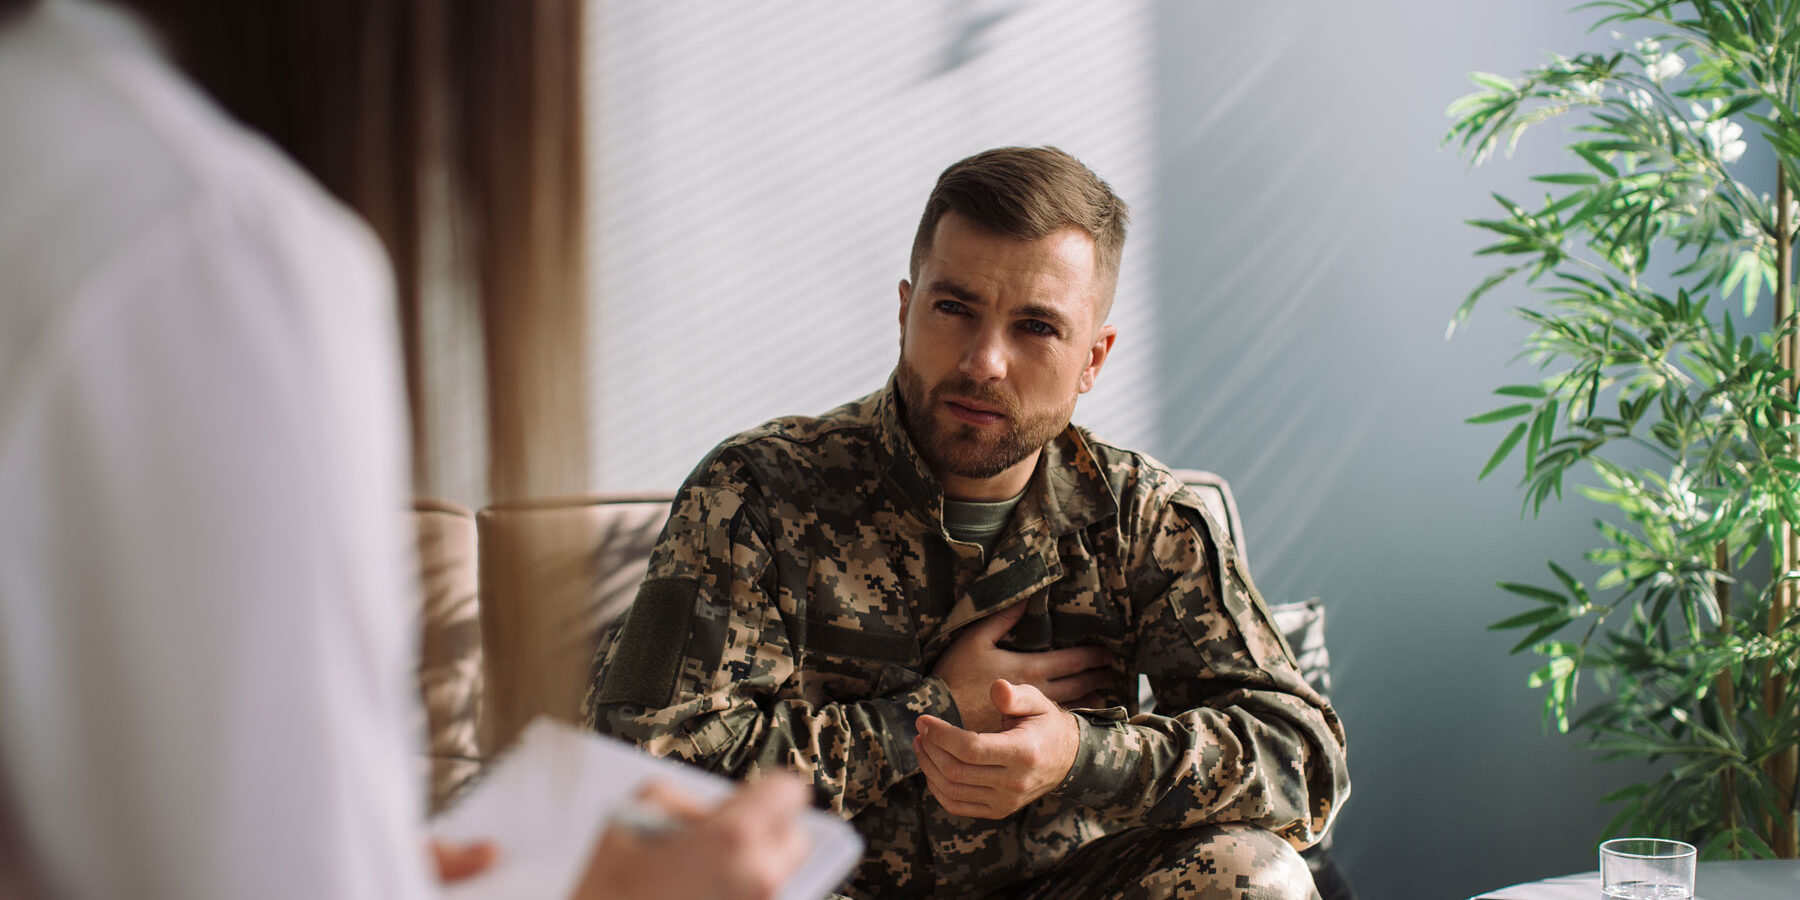 A veteran asking, "What type of insurance do most veterans have?"